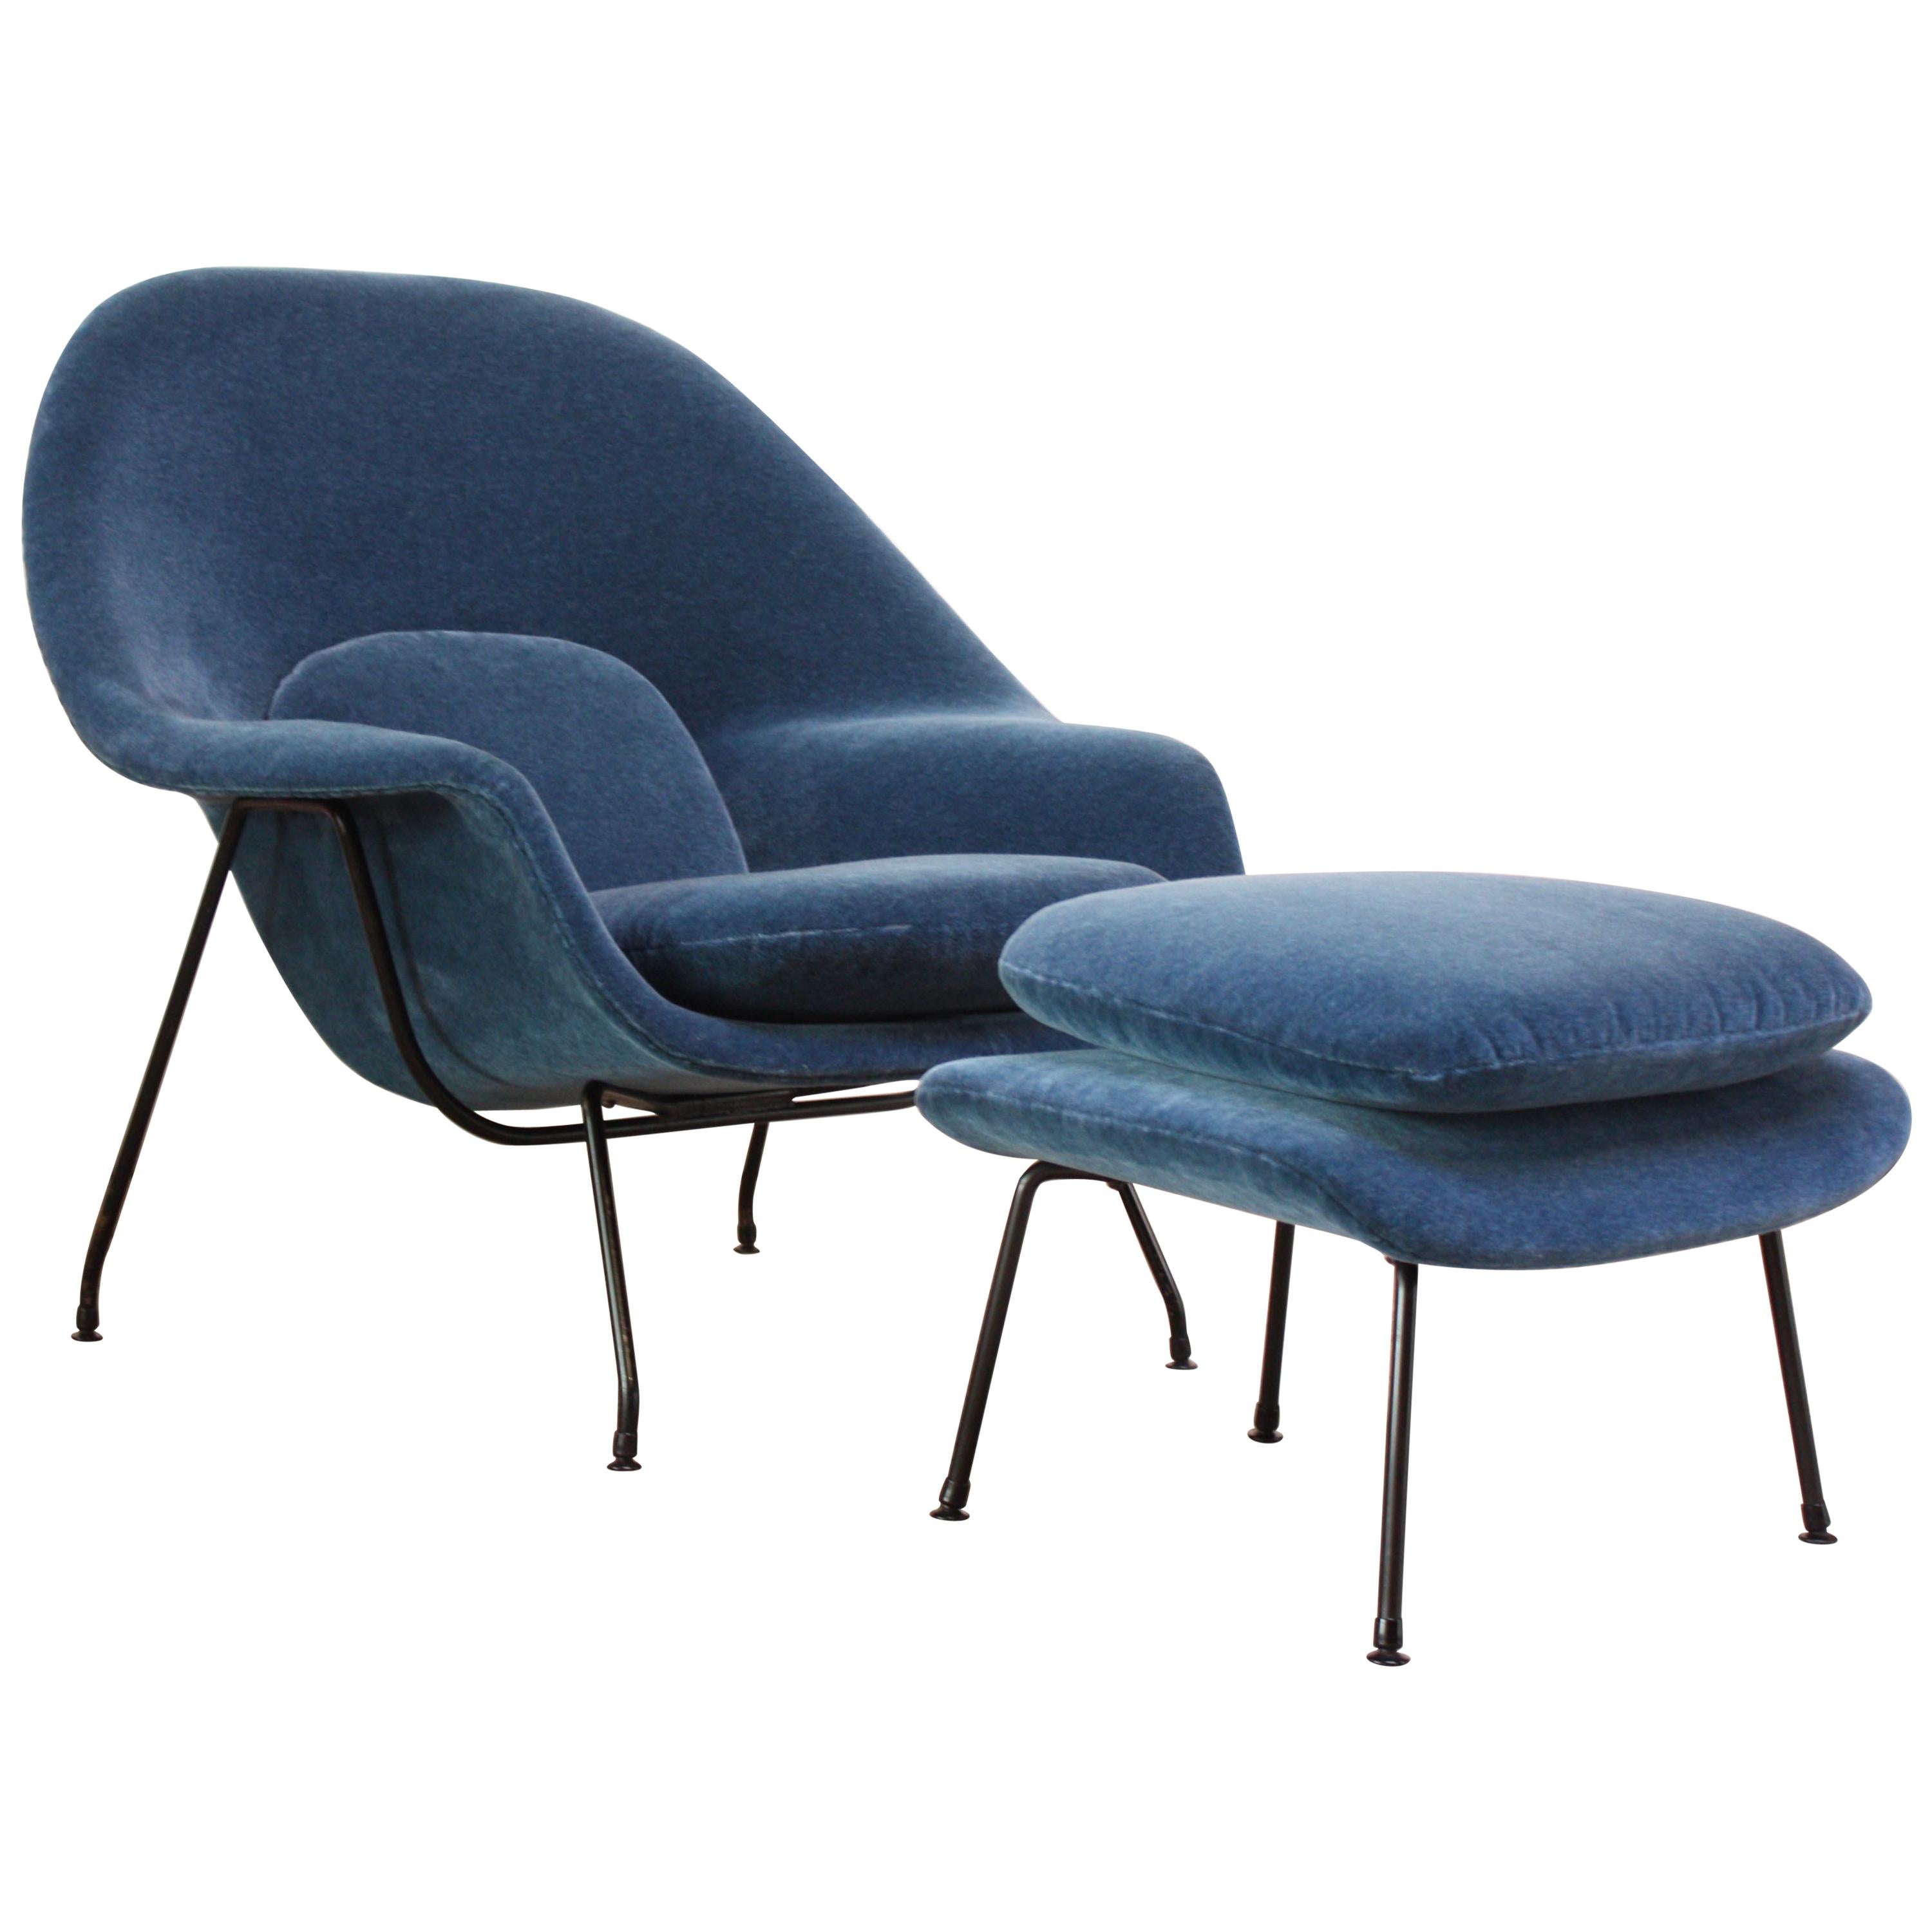 Early Production Eero Saarinen for Knoll Womb Chair and Ottoman